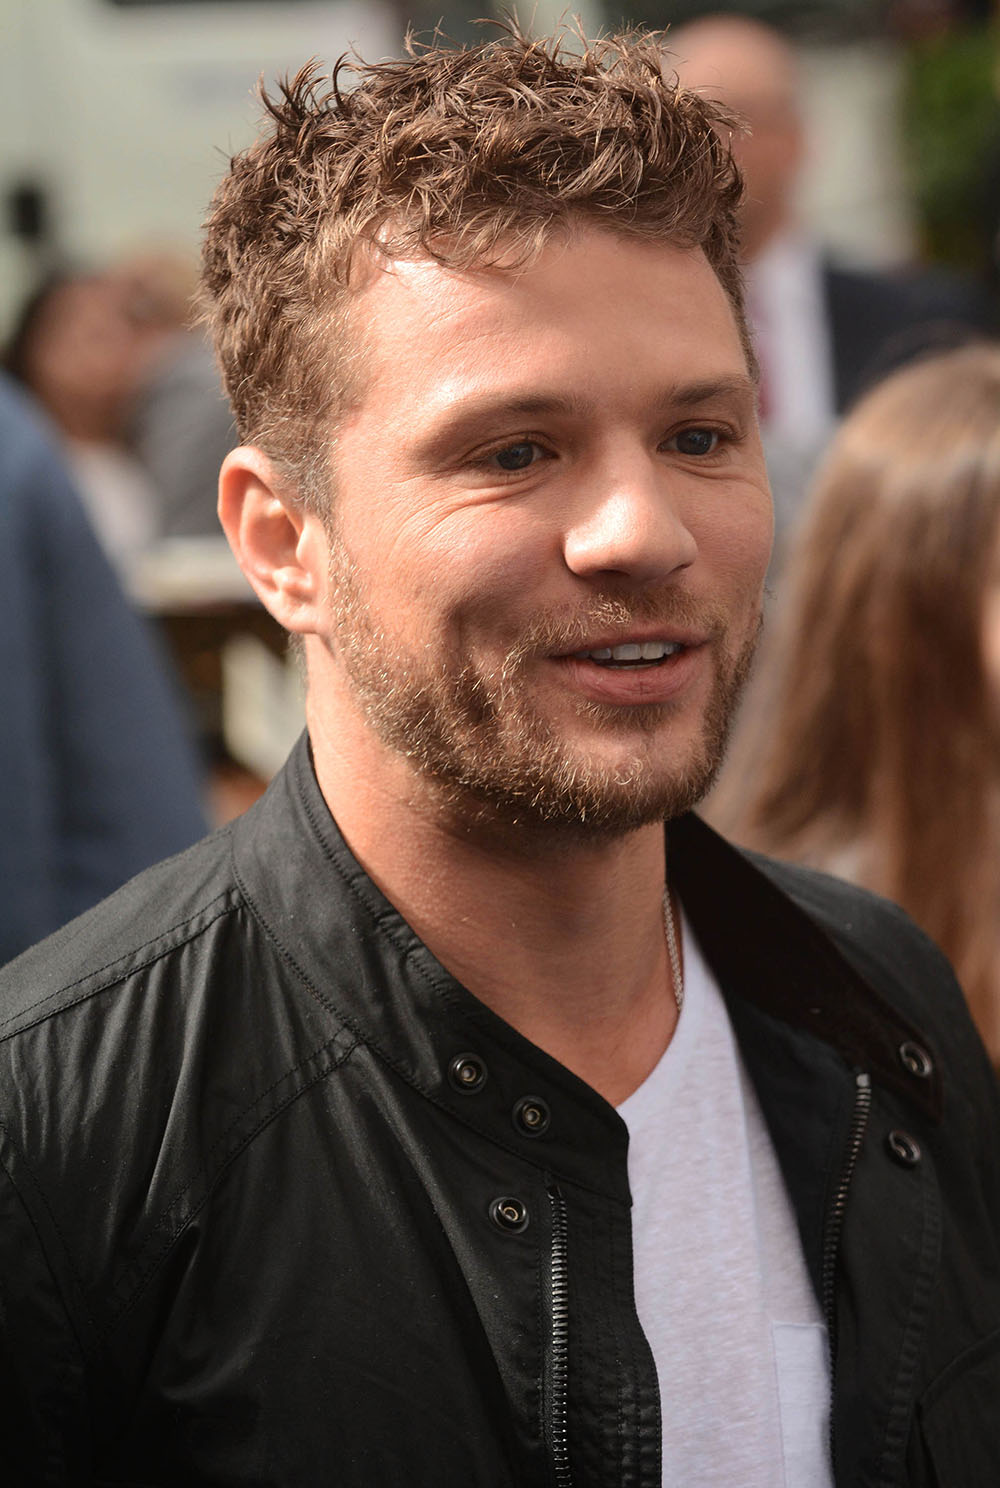 Ryan Phillippe gives us a sneak peek at his Men’s Fitness photo shoot.